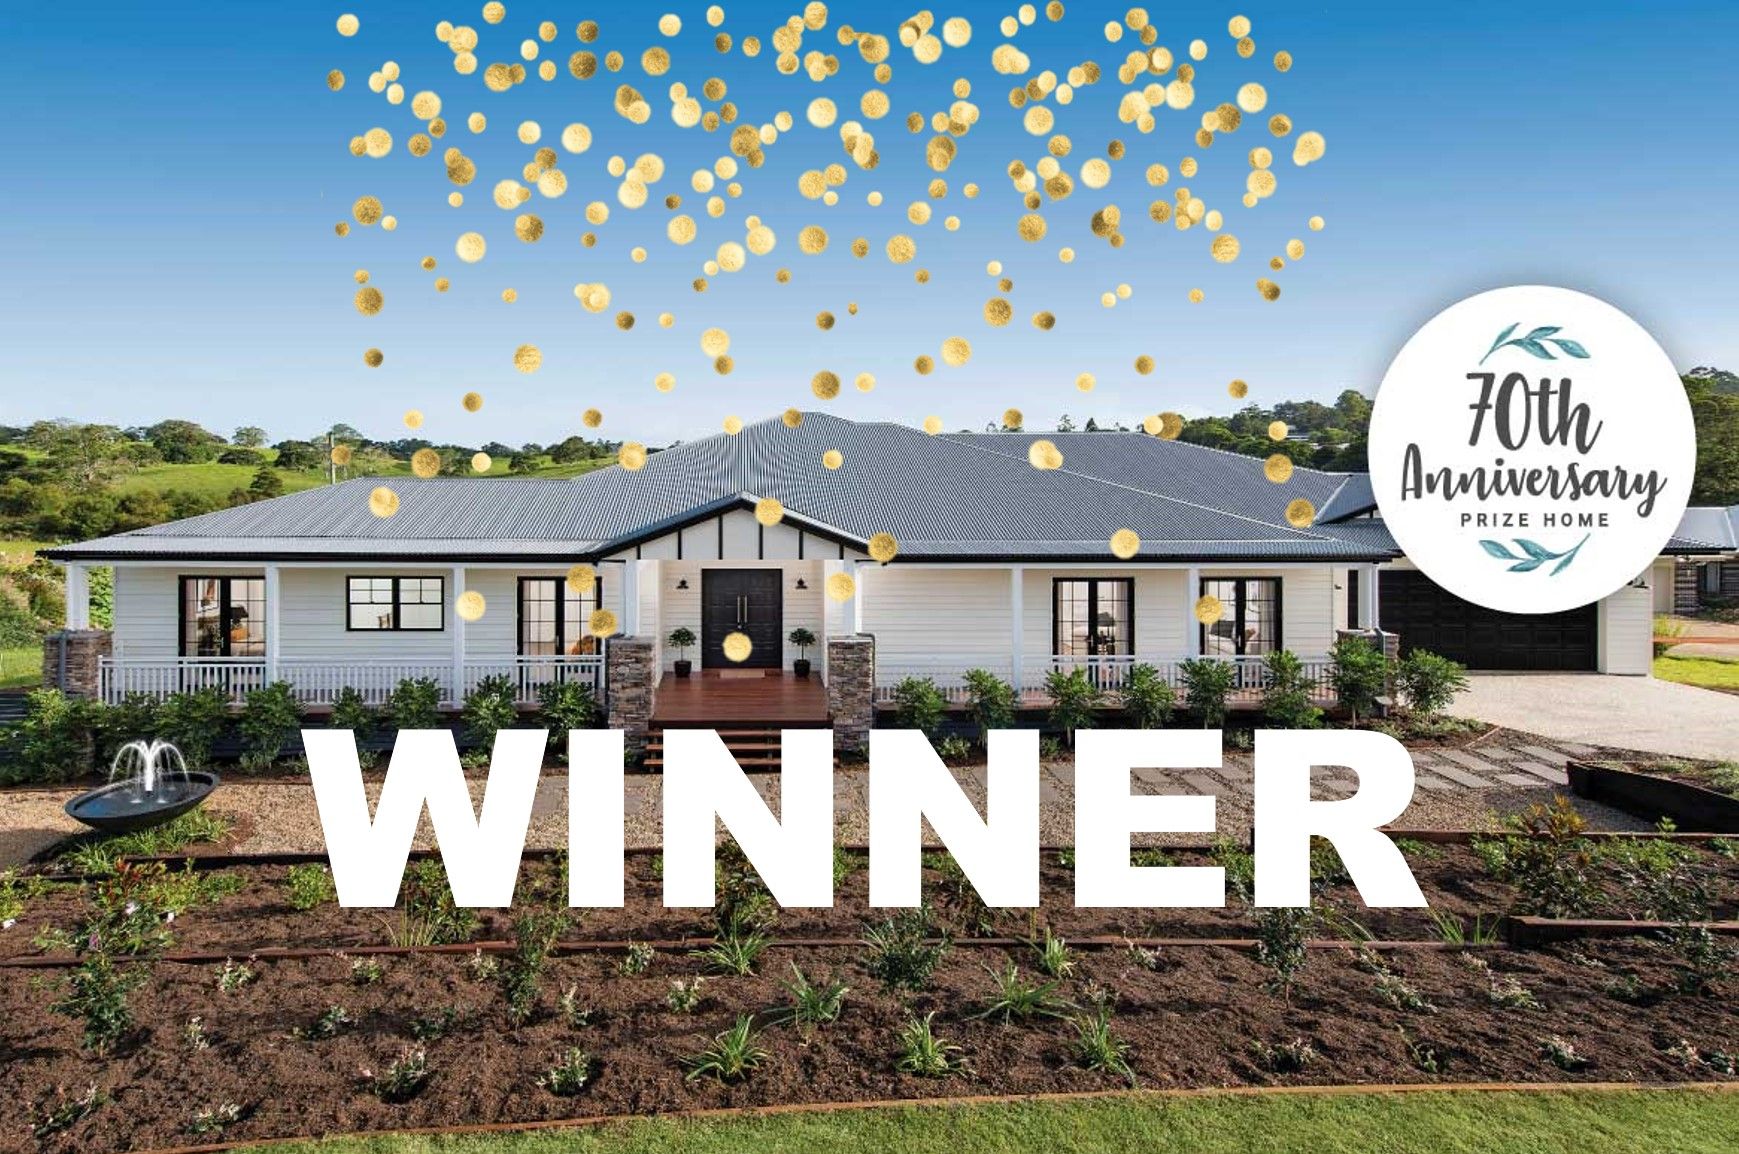 Endeavour Foundation Prize Home Lottery Winner